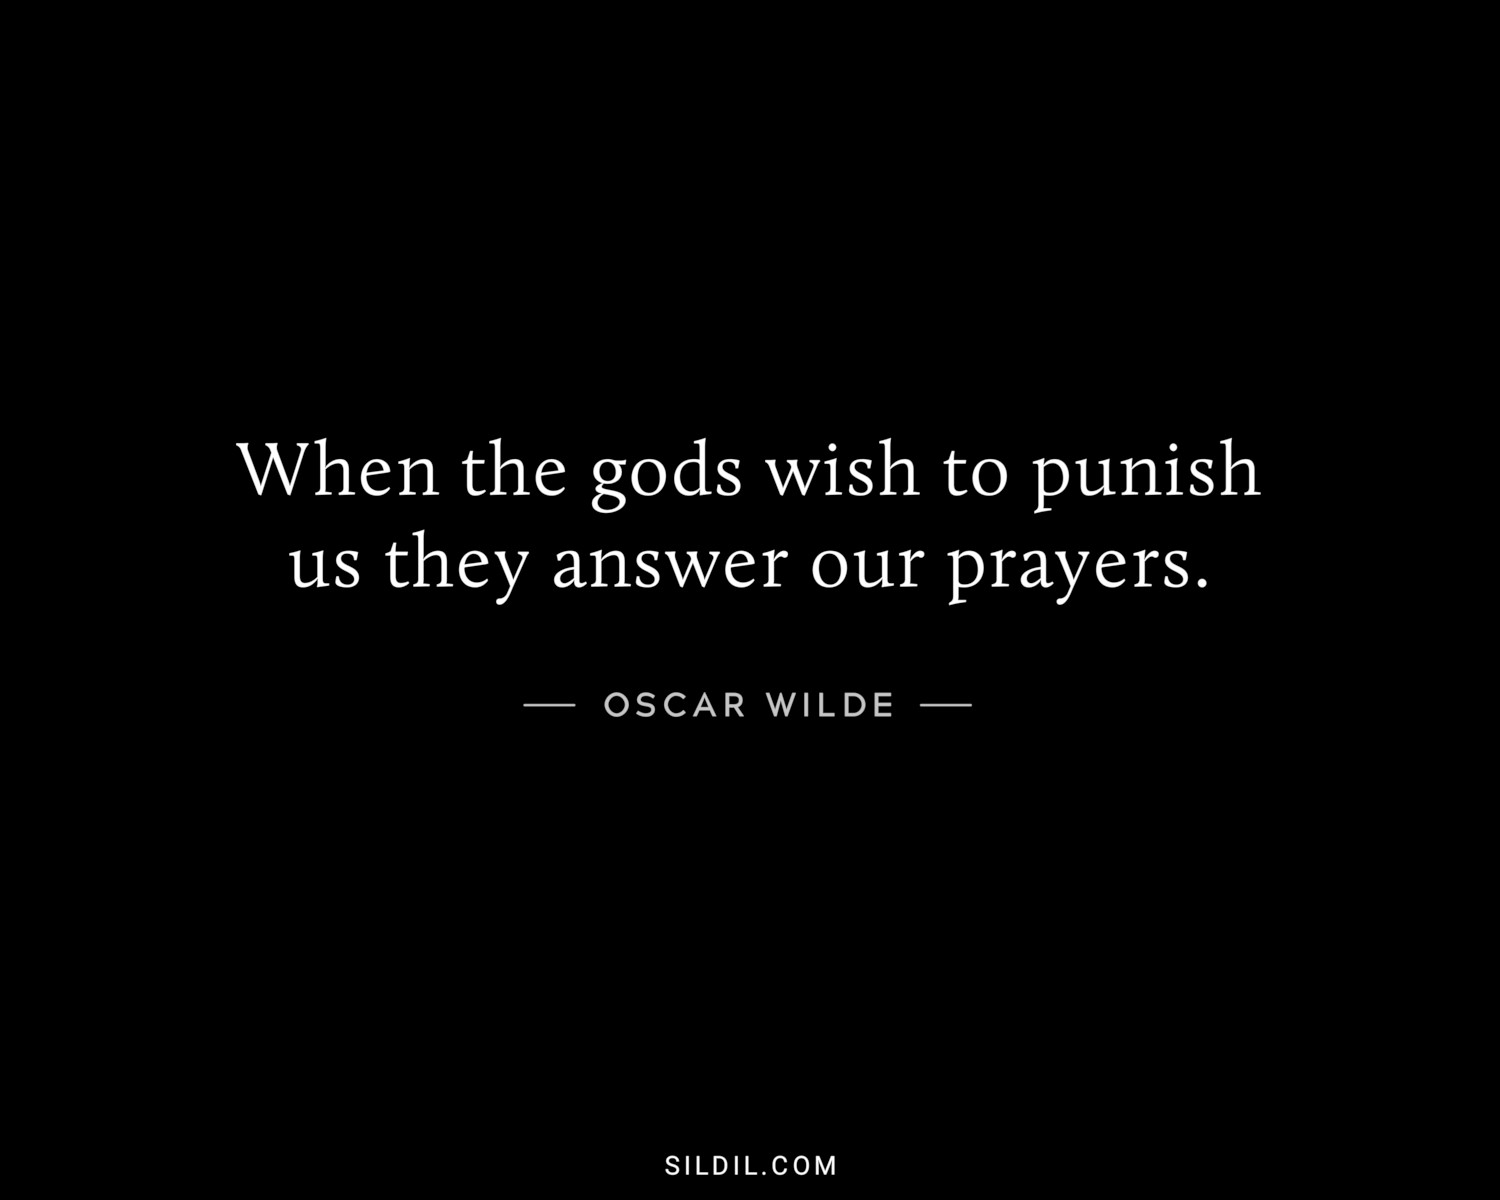 When the gods wish to punish us they answer our prayers.